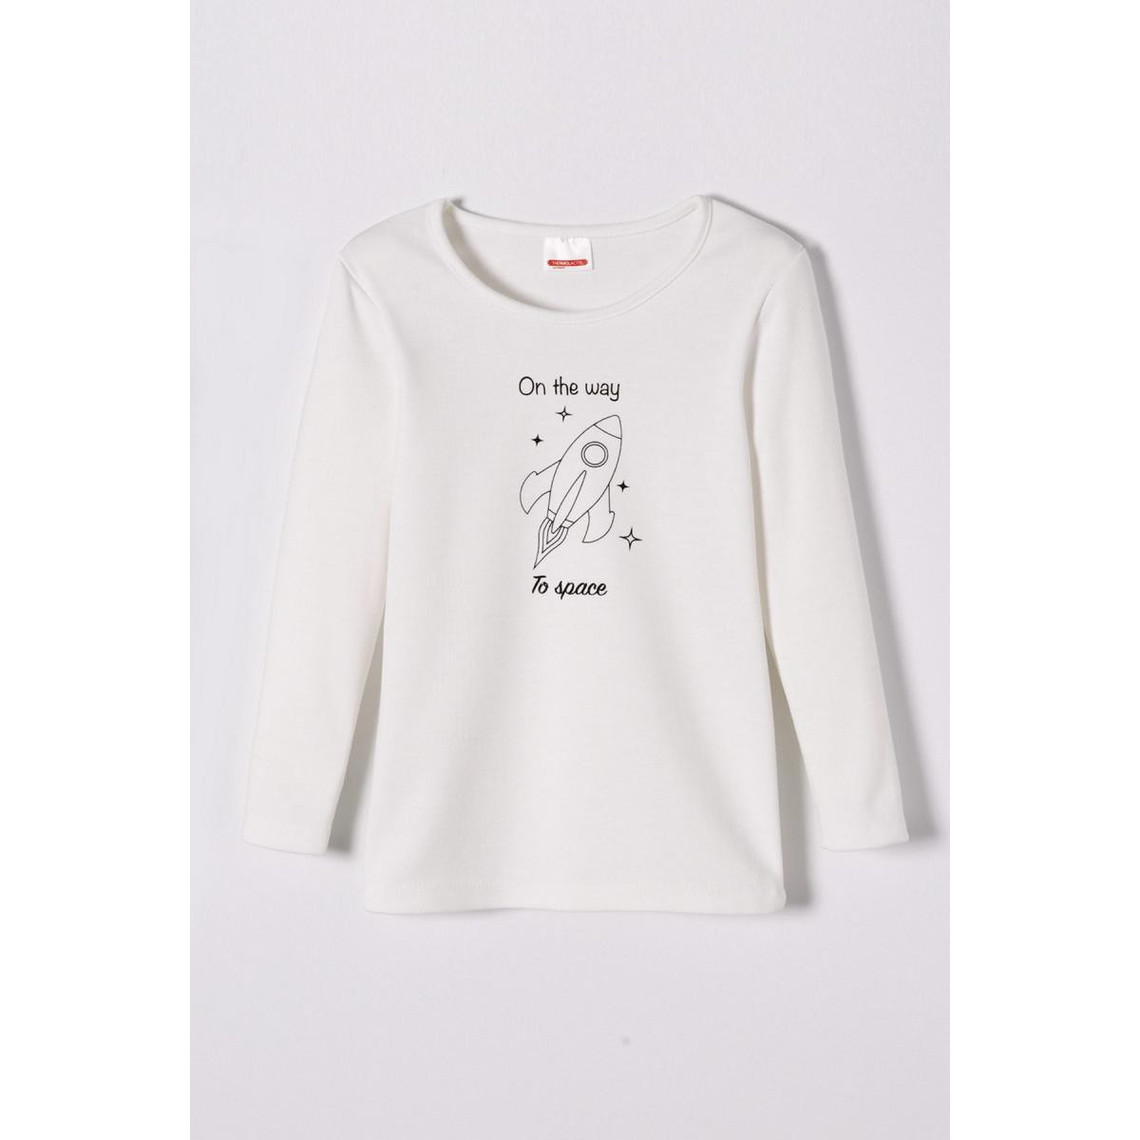 Tee Shirt Enfant Manches Longues Blanc Thermolactyl